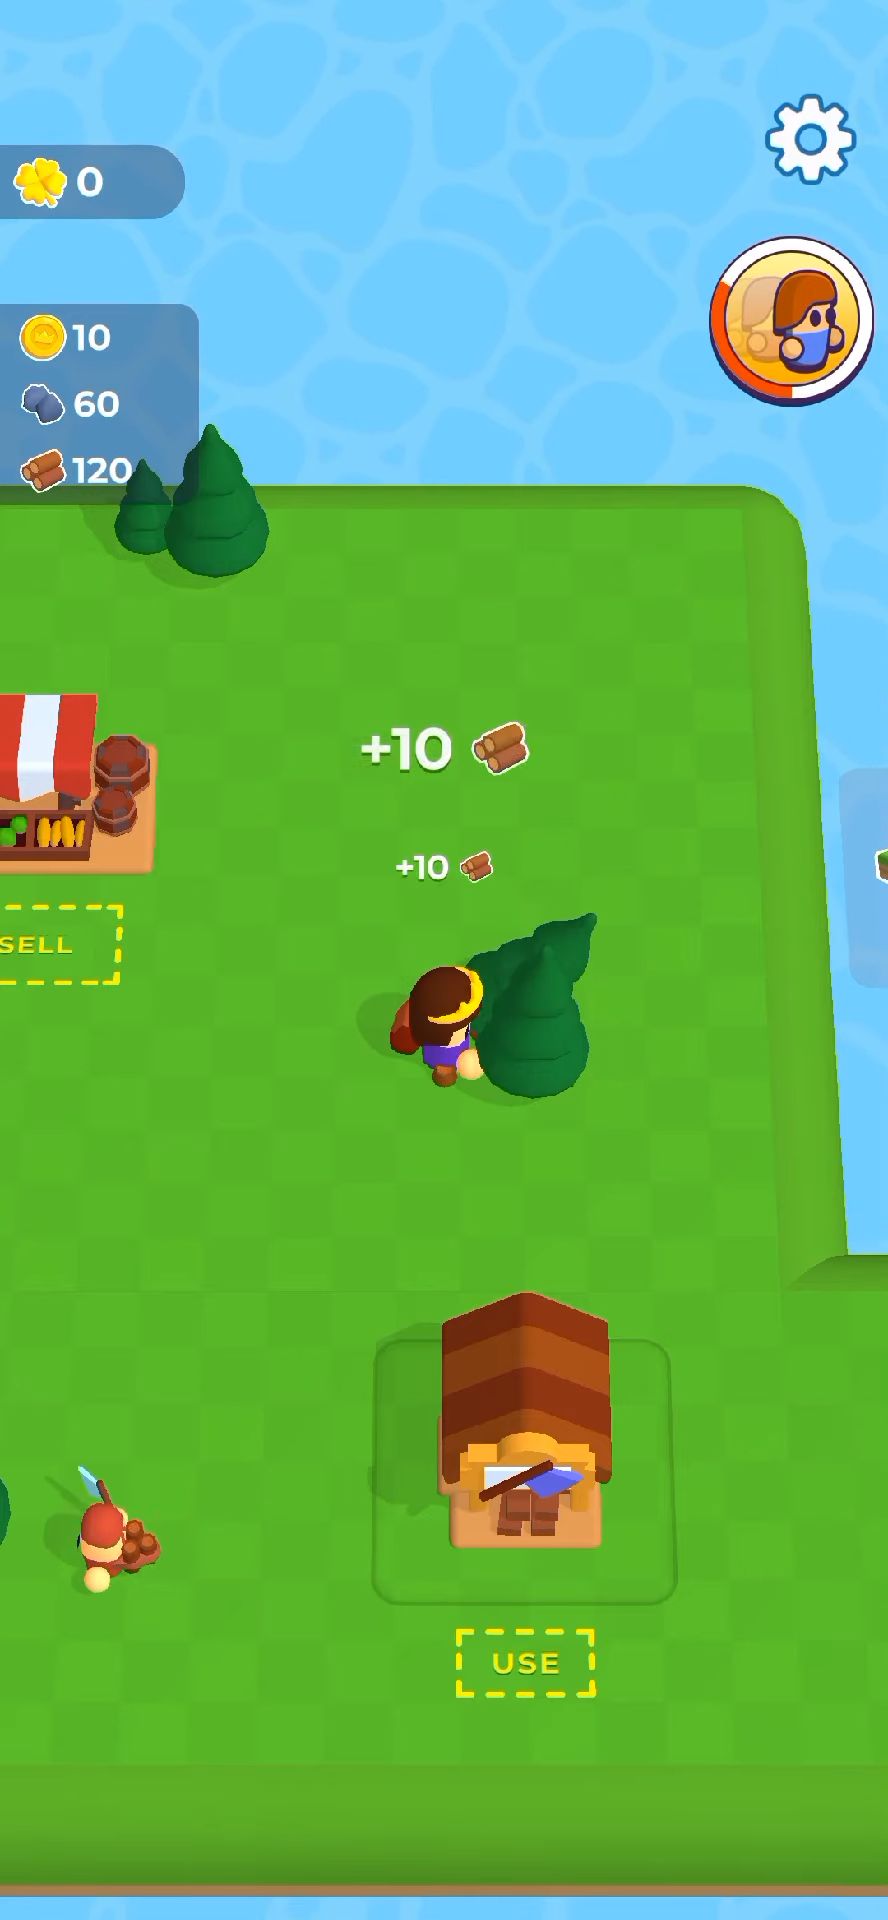 Gameplay of the Idle Craft World for Android phone or tablet.